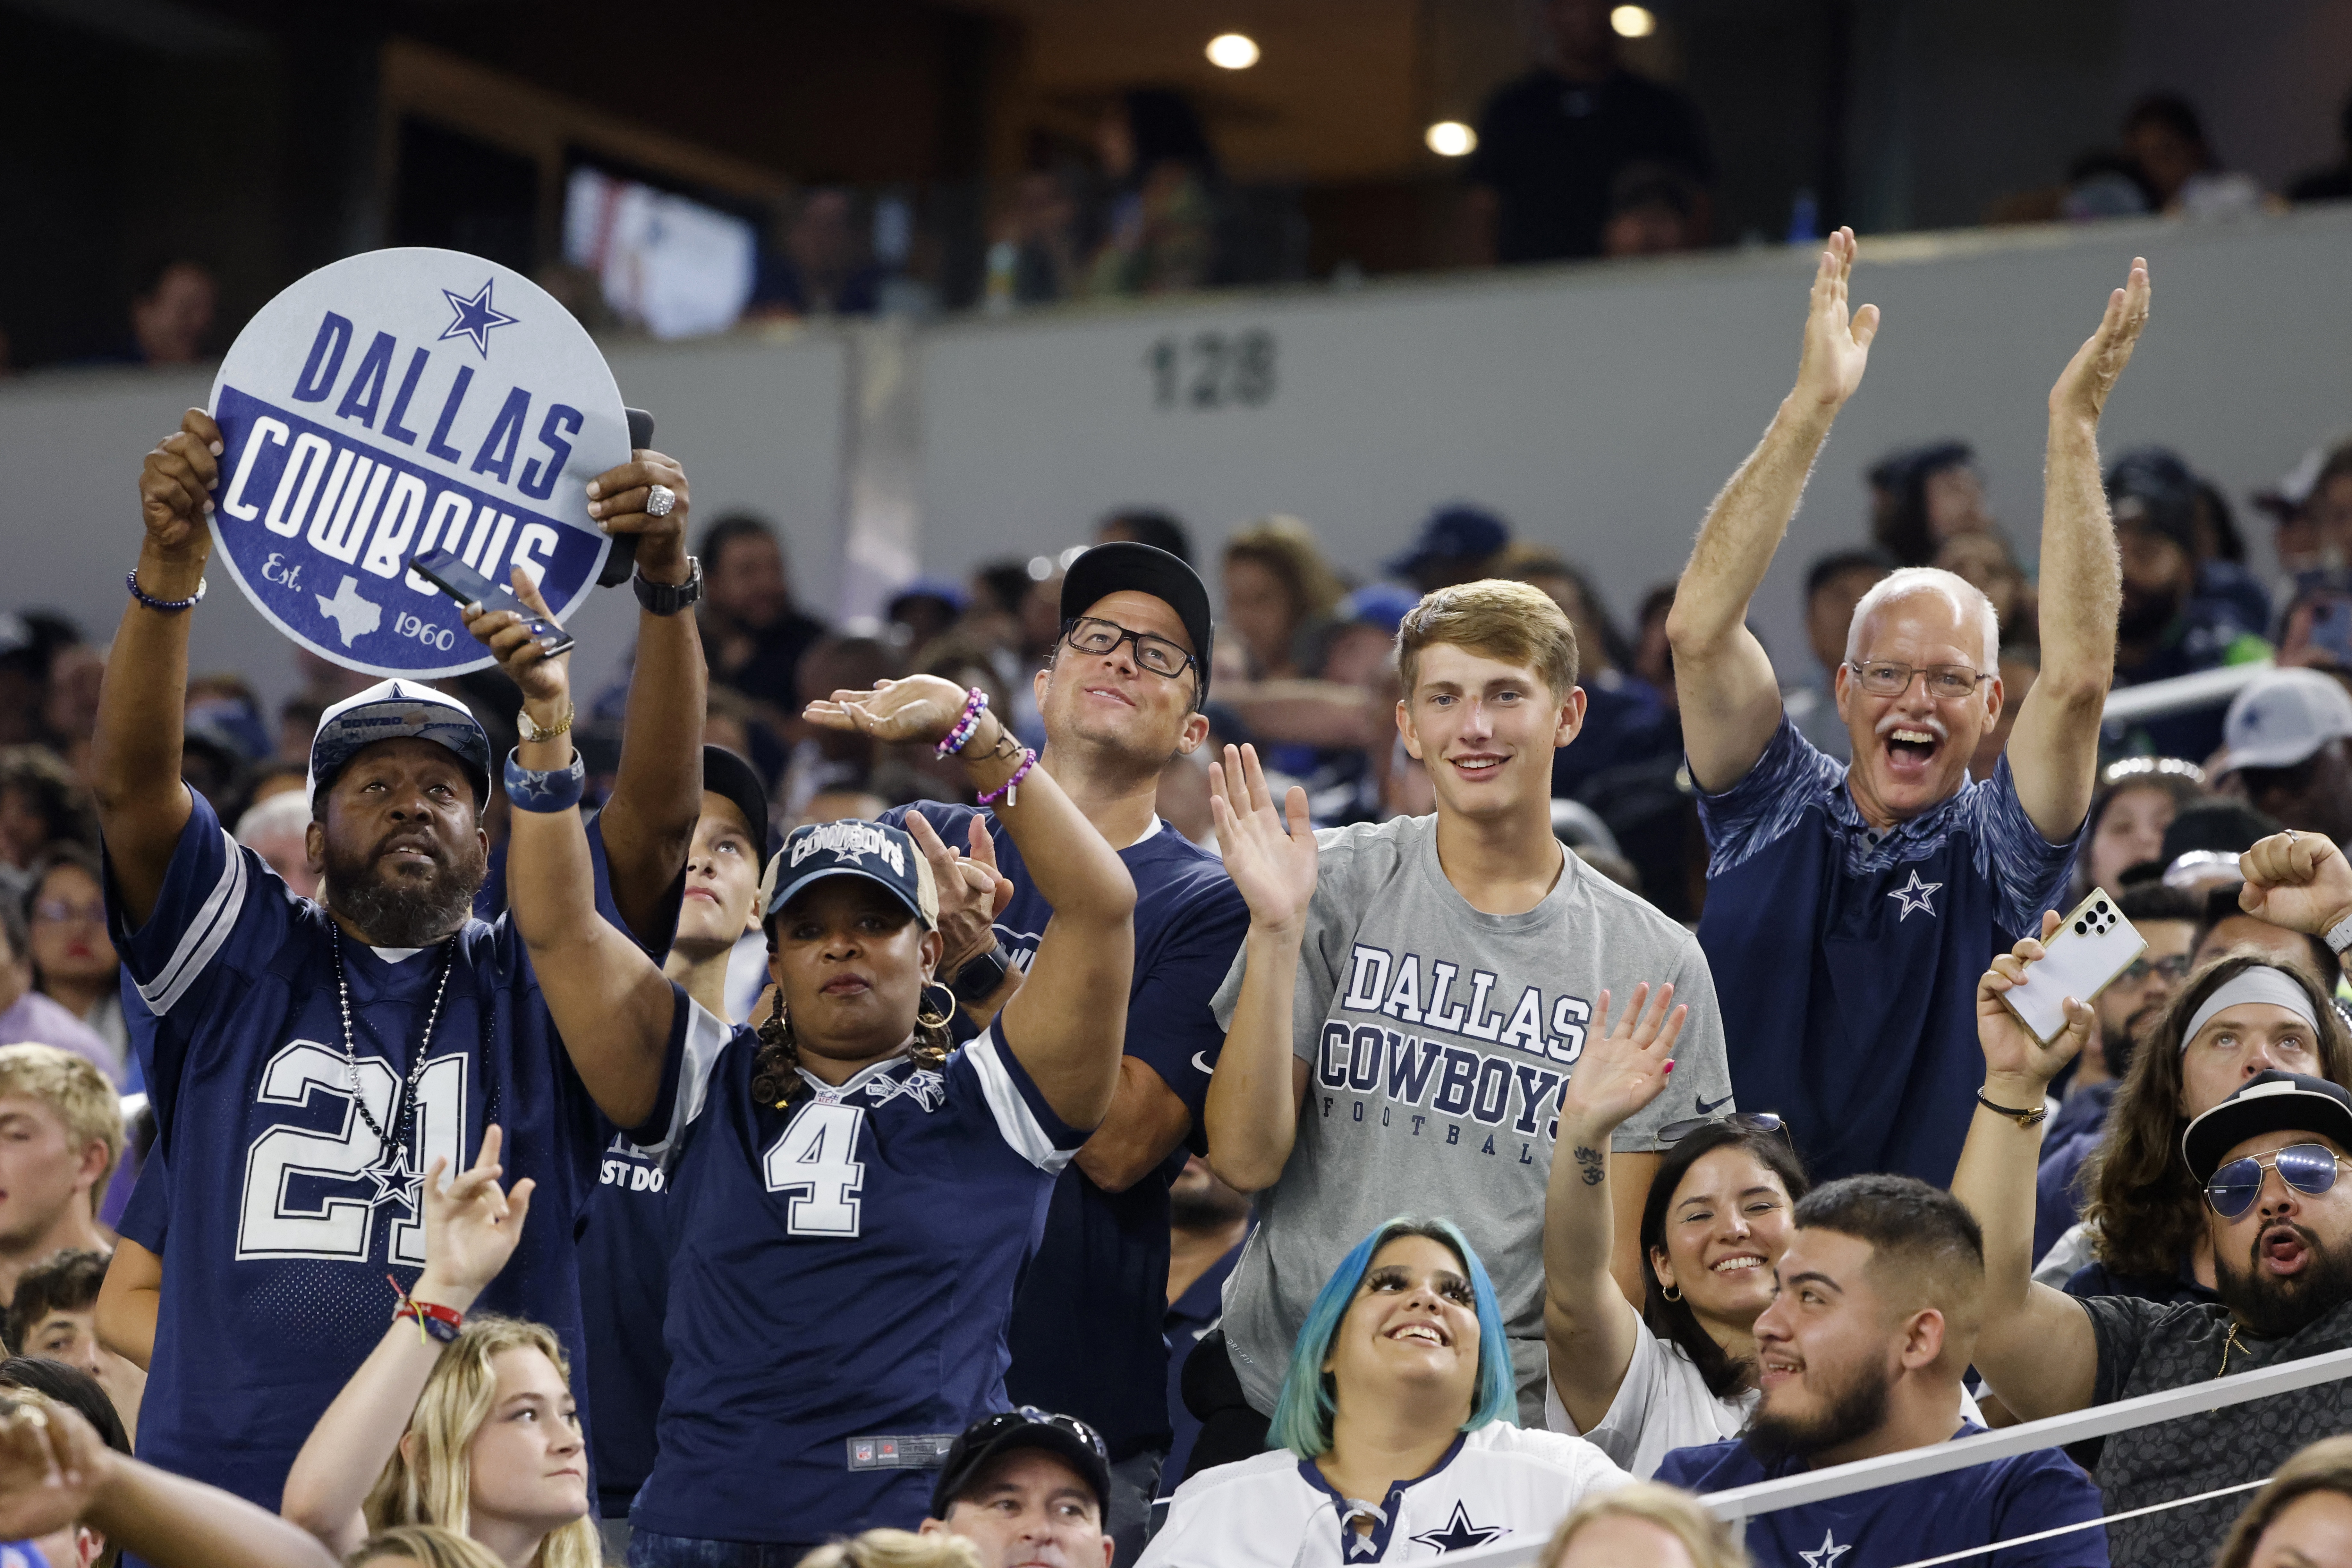 dallas cowboys ticket packages